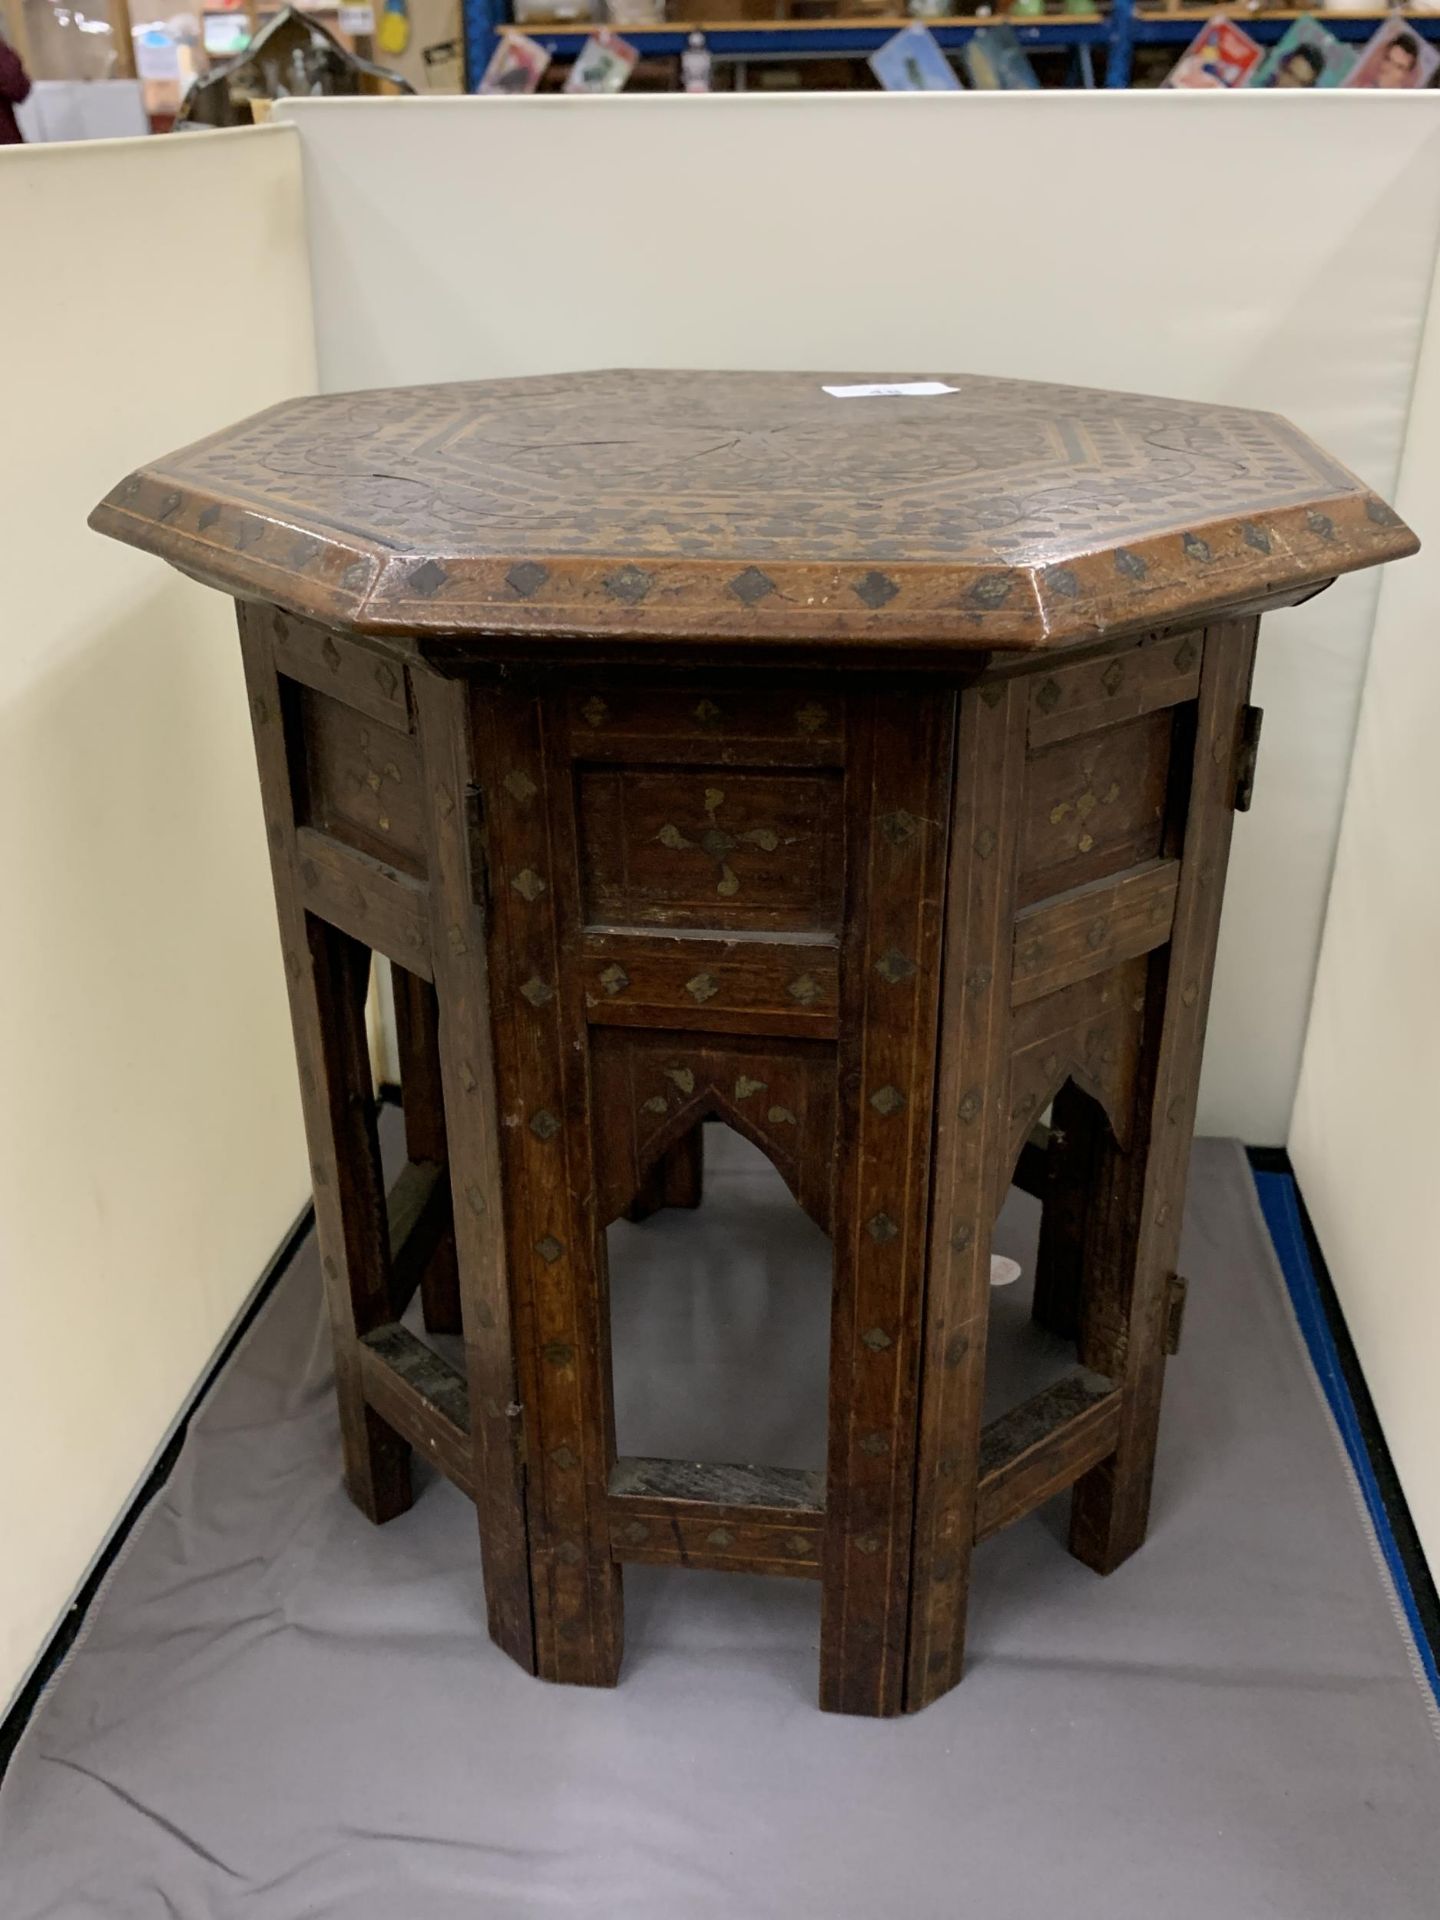 A LATE 19TH CENTURY INDIAN OCTAGONAL TABLE WITH BRASS INLAY